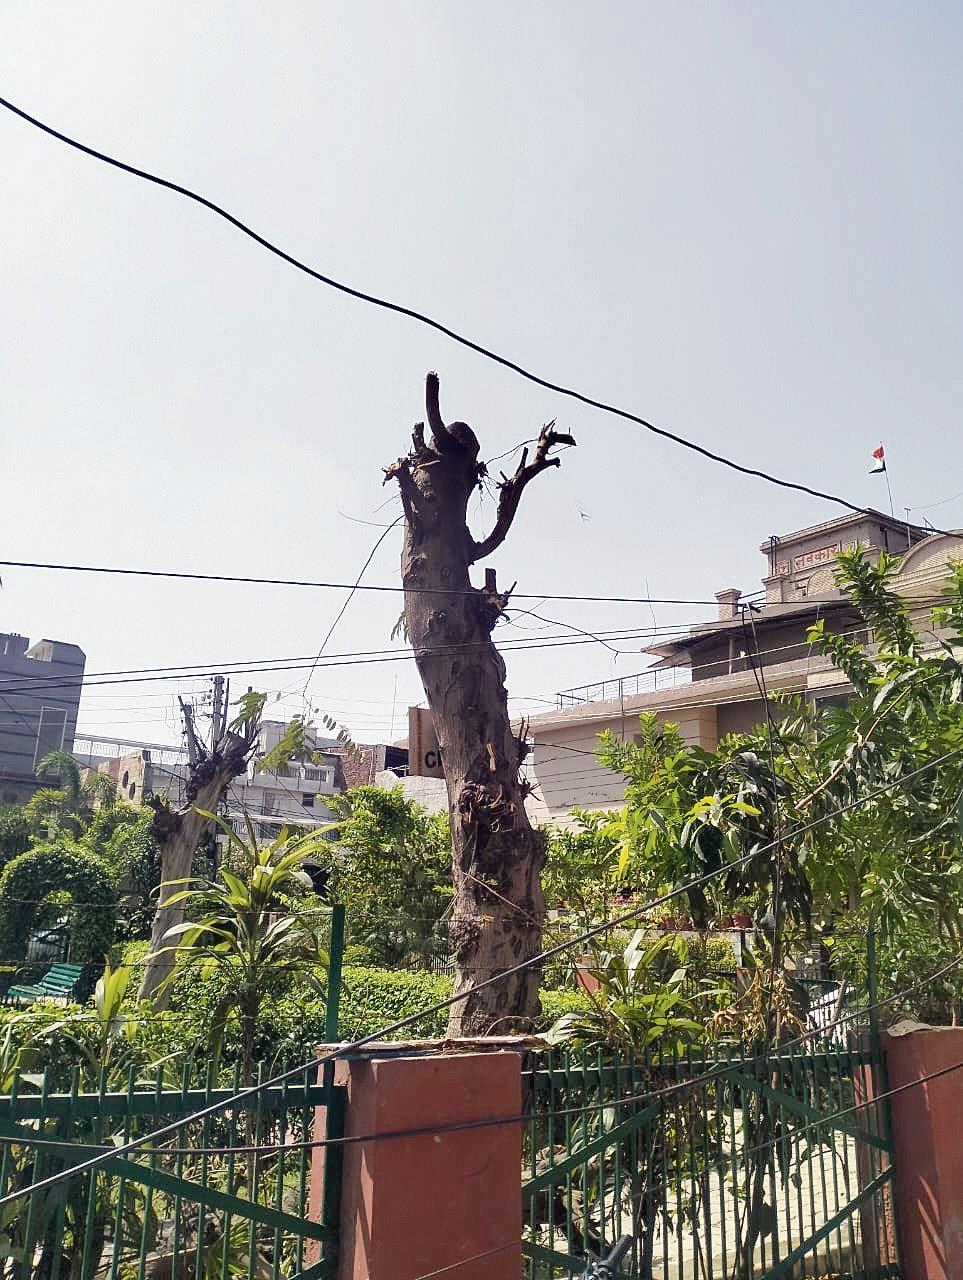 Complaint against ‘unauthorised’ cutting of trees